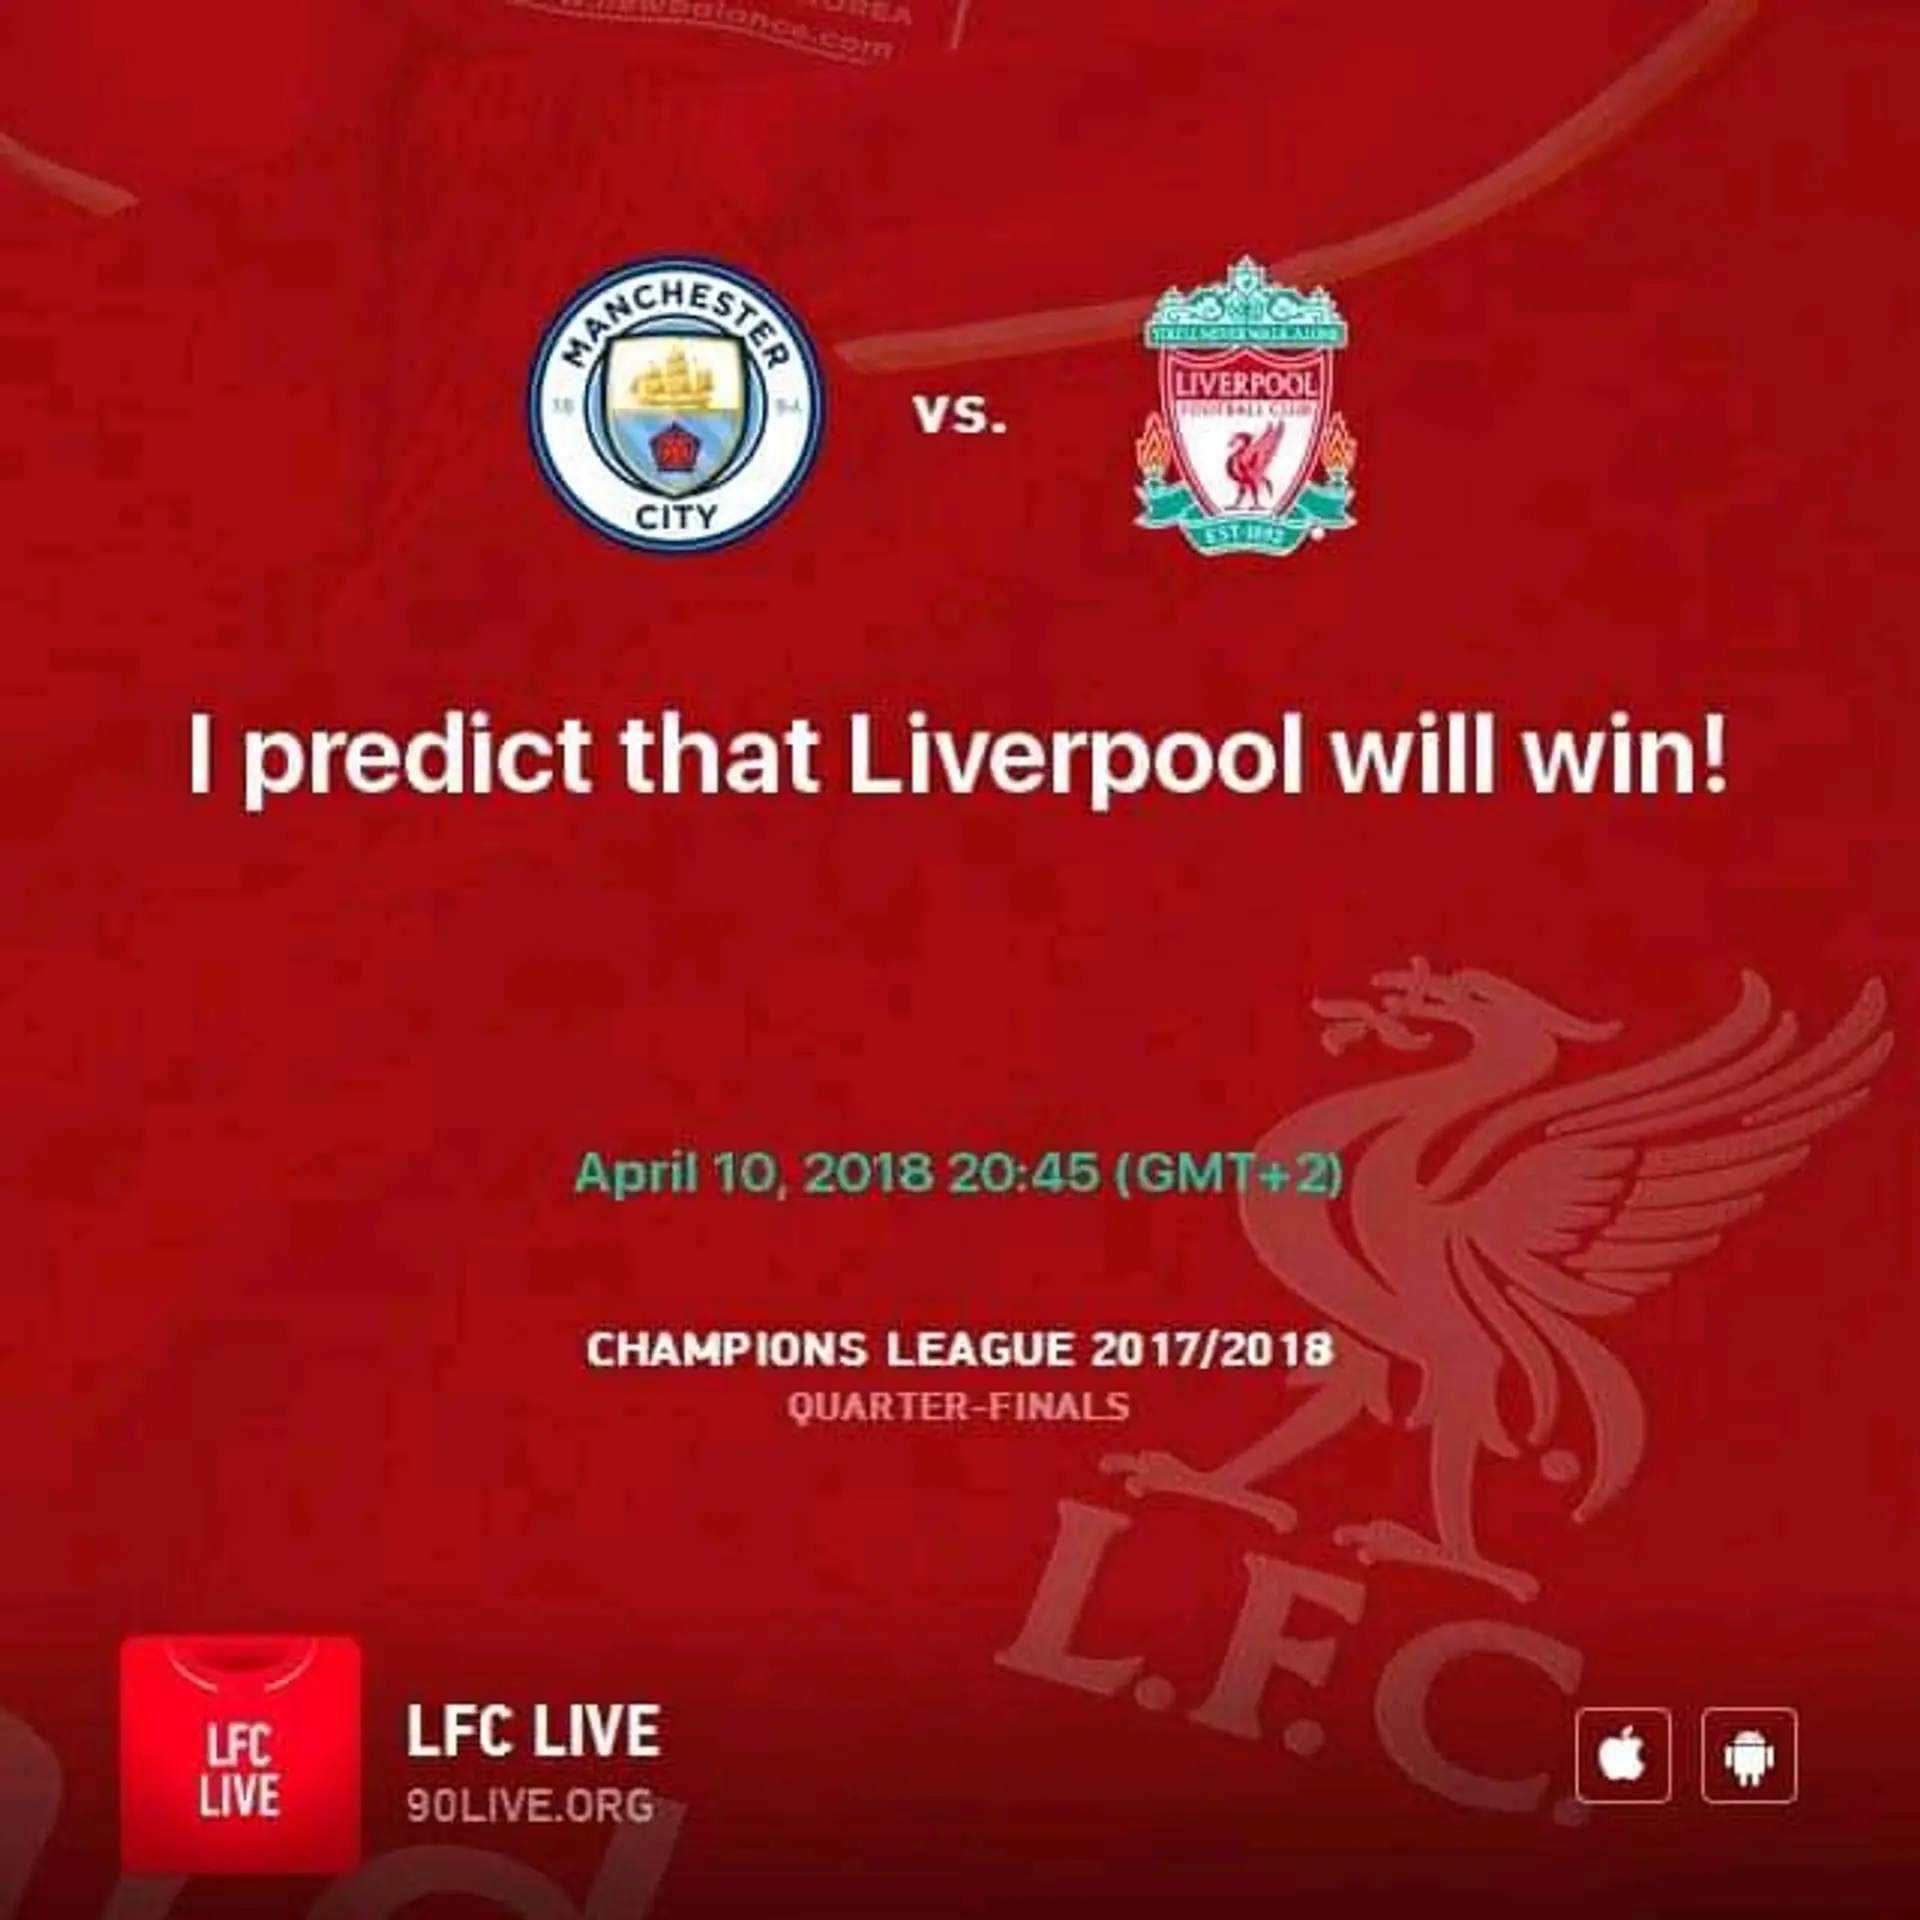 EXACTLY FOUR YEARS AGO TODAY I PREDICTED LIVERPOOL TO BEAT MAN CITY IN UCL AND IT HAPPENED, SO CAN HISTORY REPEAT ITSELF THIS TIME IN THE EPL? I SAY YES